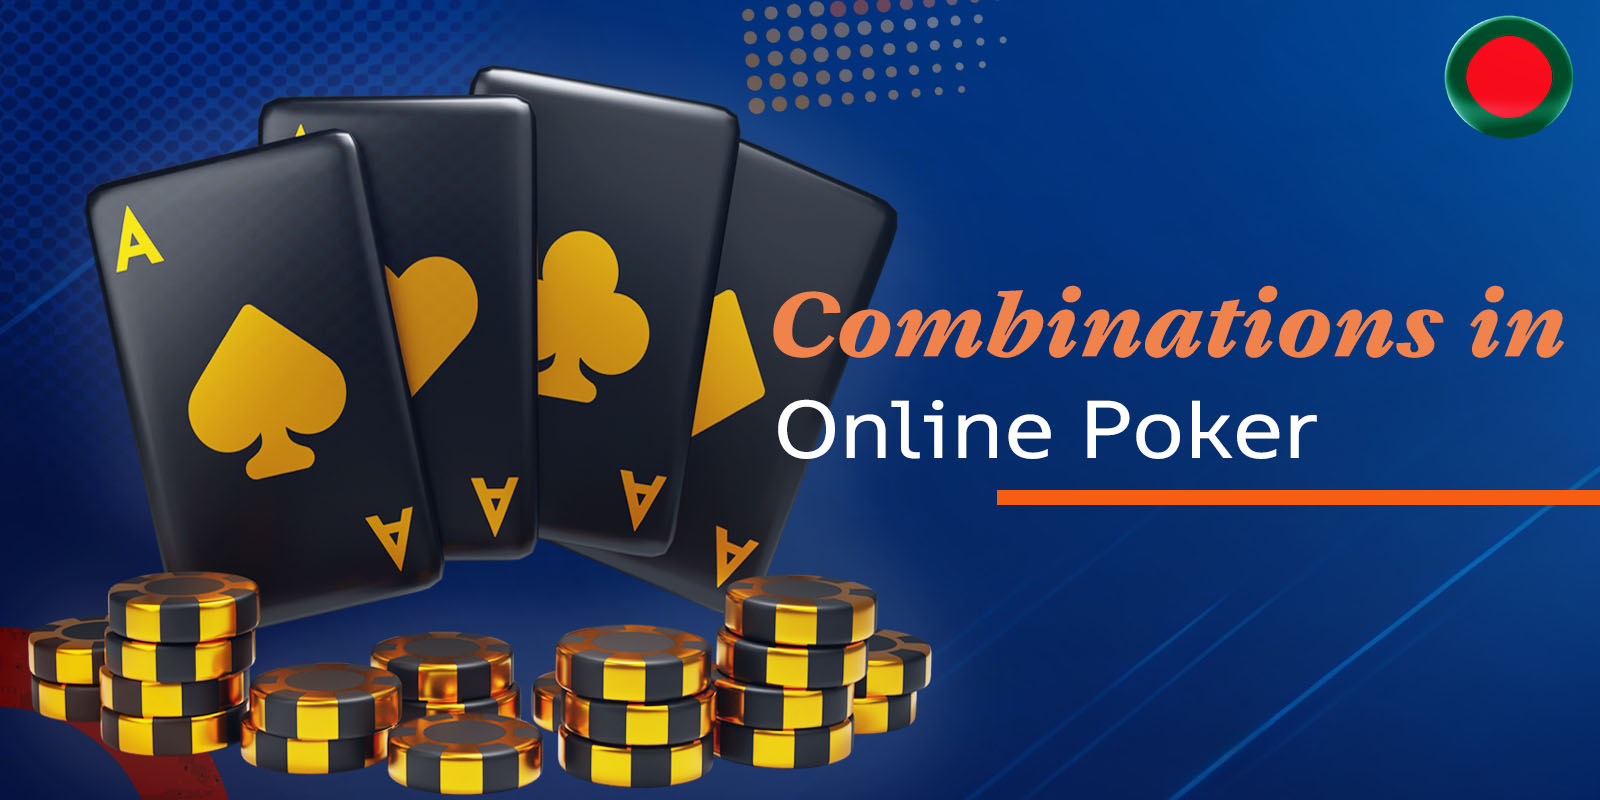 The games from the Live Casino section use traditional poker combinations